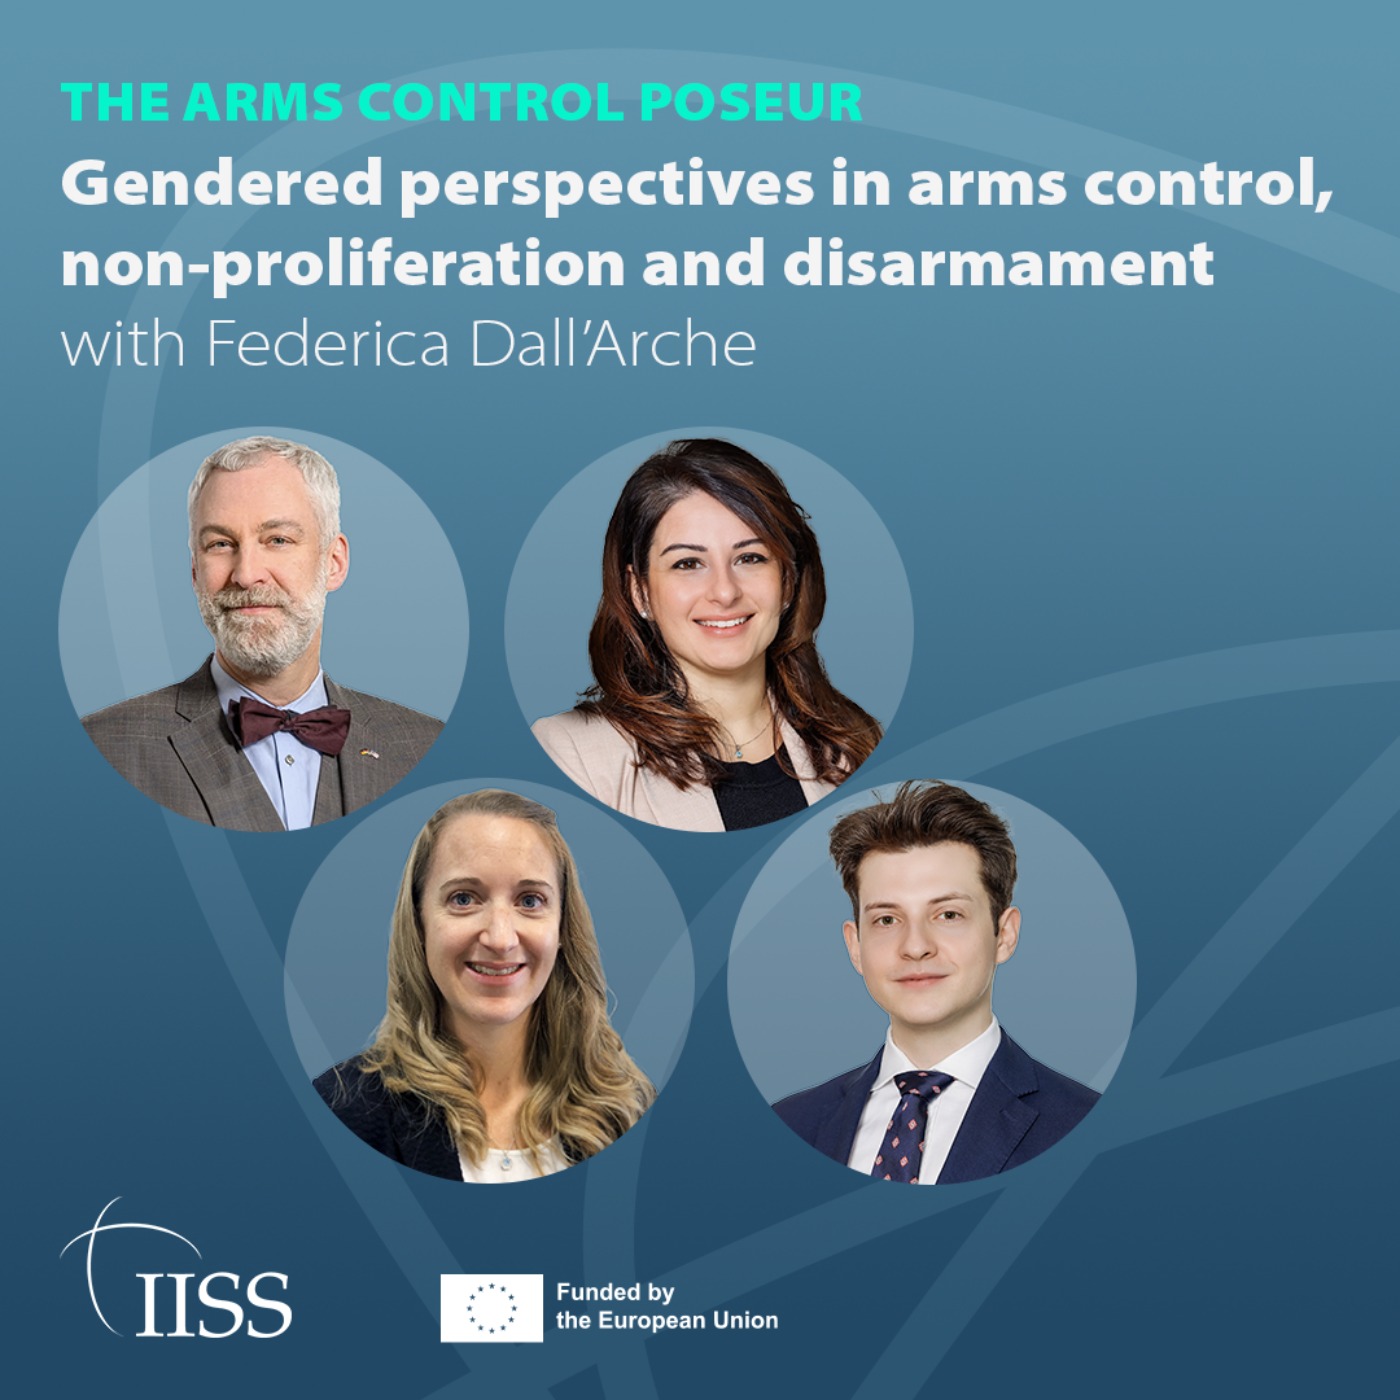 Gendered perspectives in arms control, non-proliferation and disarmament with Federica Dall’Arche